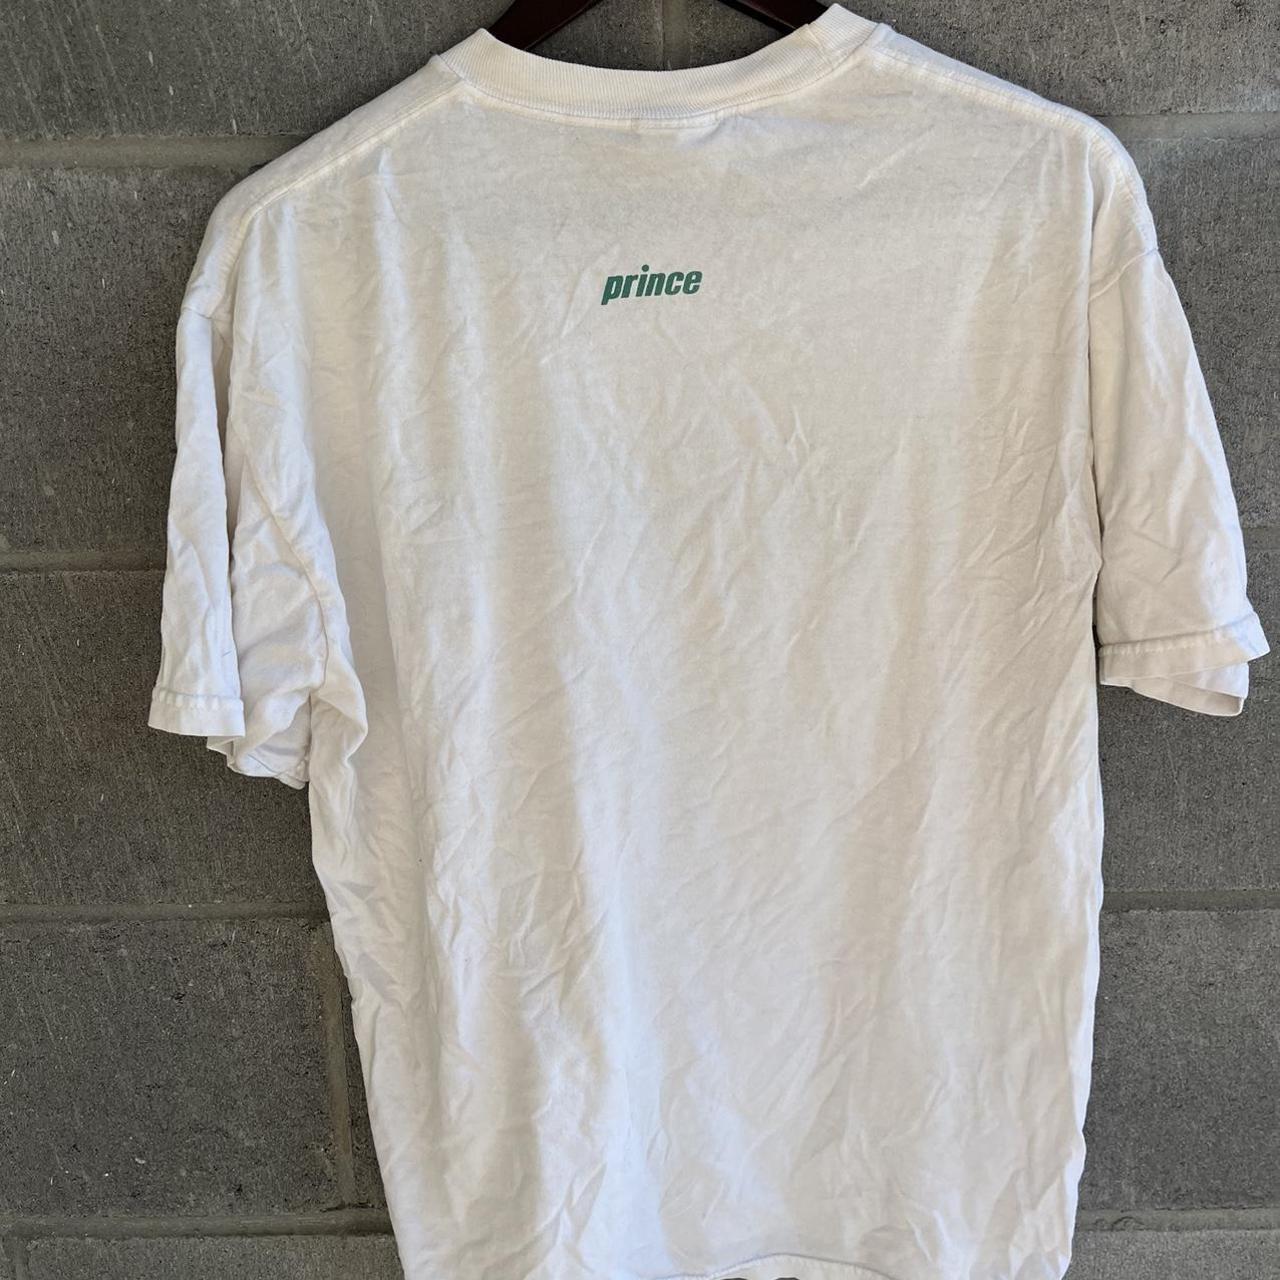 Product Image 3 - prince sportswear tshirt 

-great condition